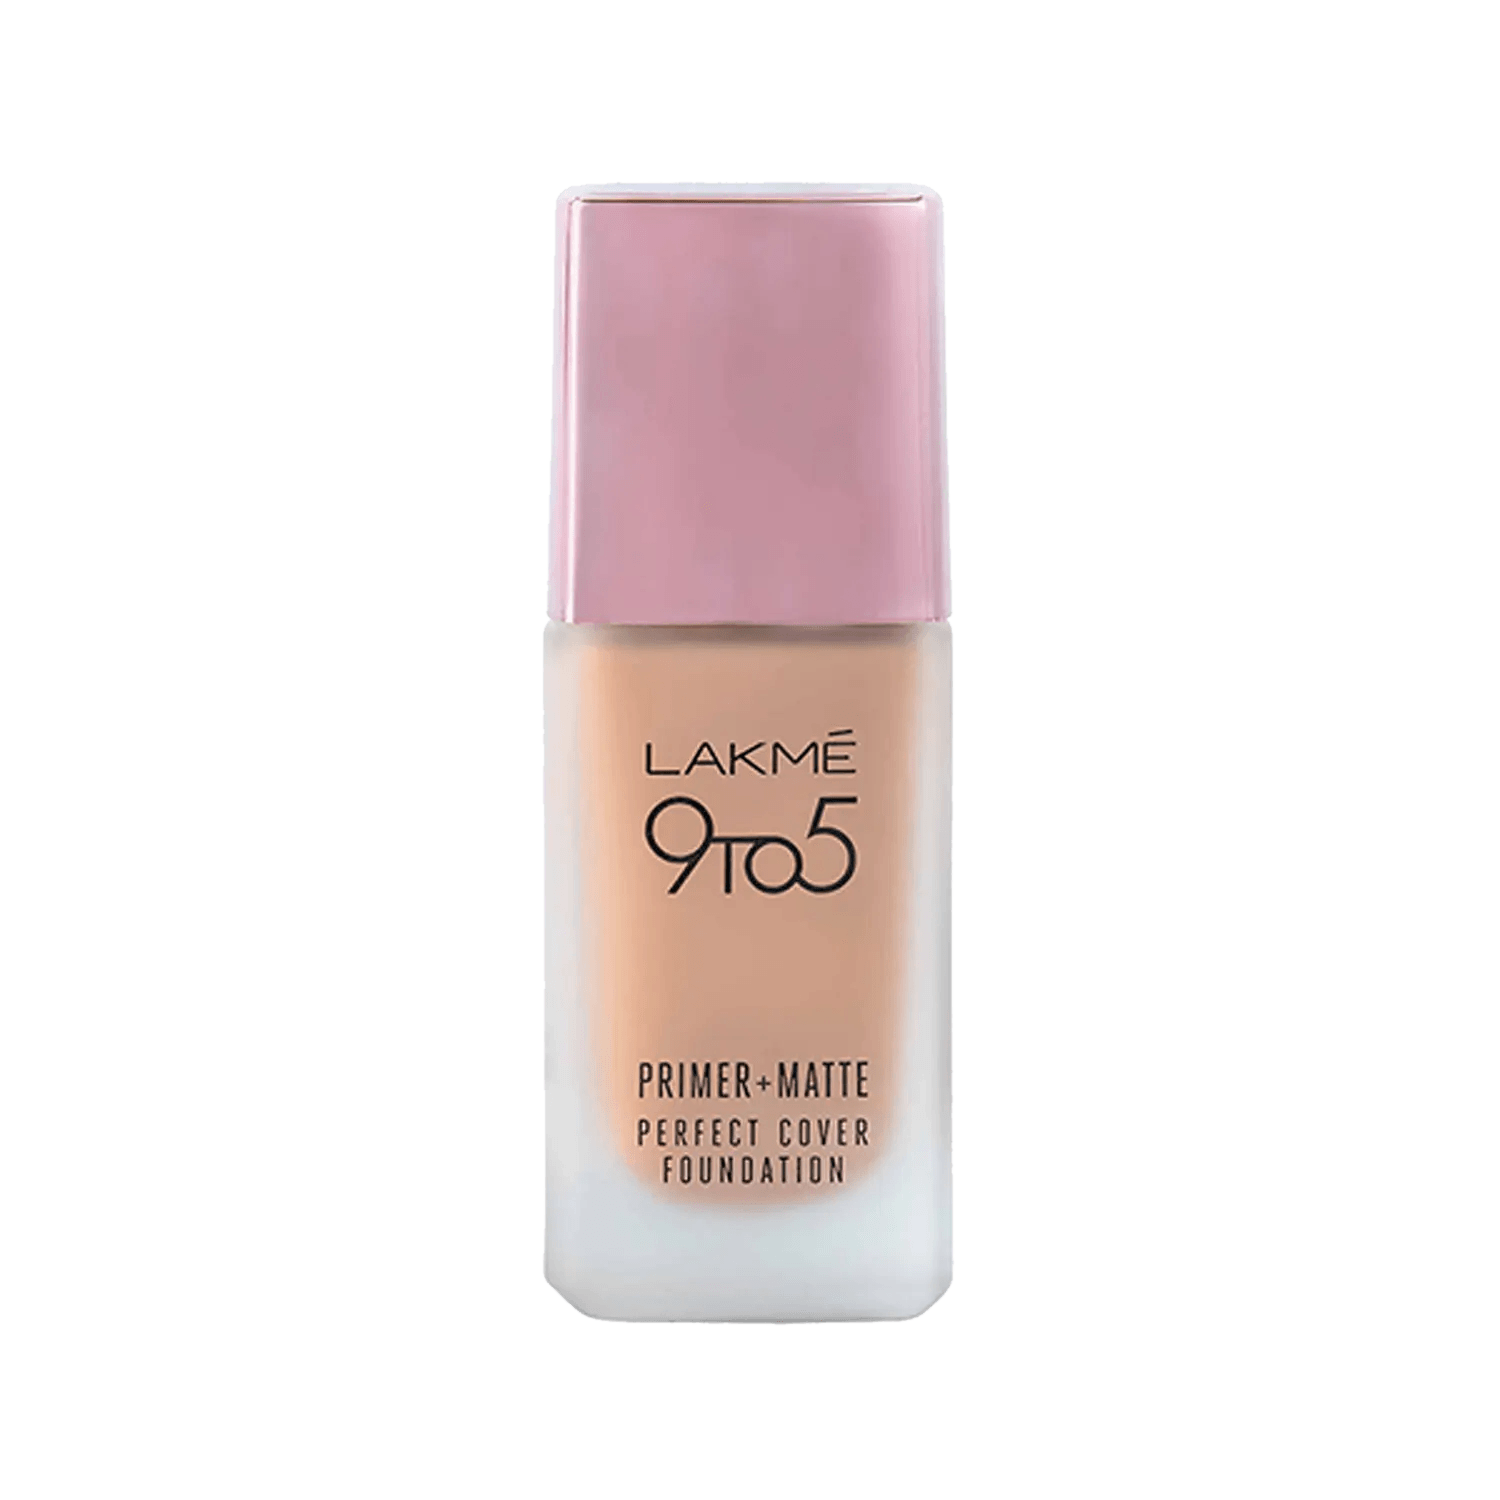 Lakme | Lakme 9 To 5 Primer + Matte Perfect Cover Foundation - C100 Cool Ivory (25ml)